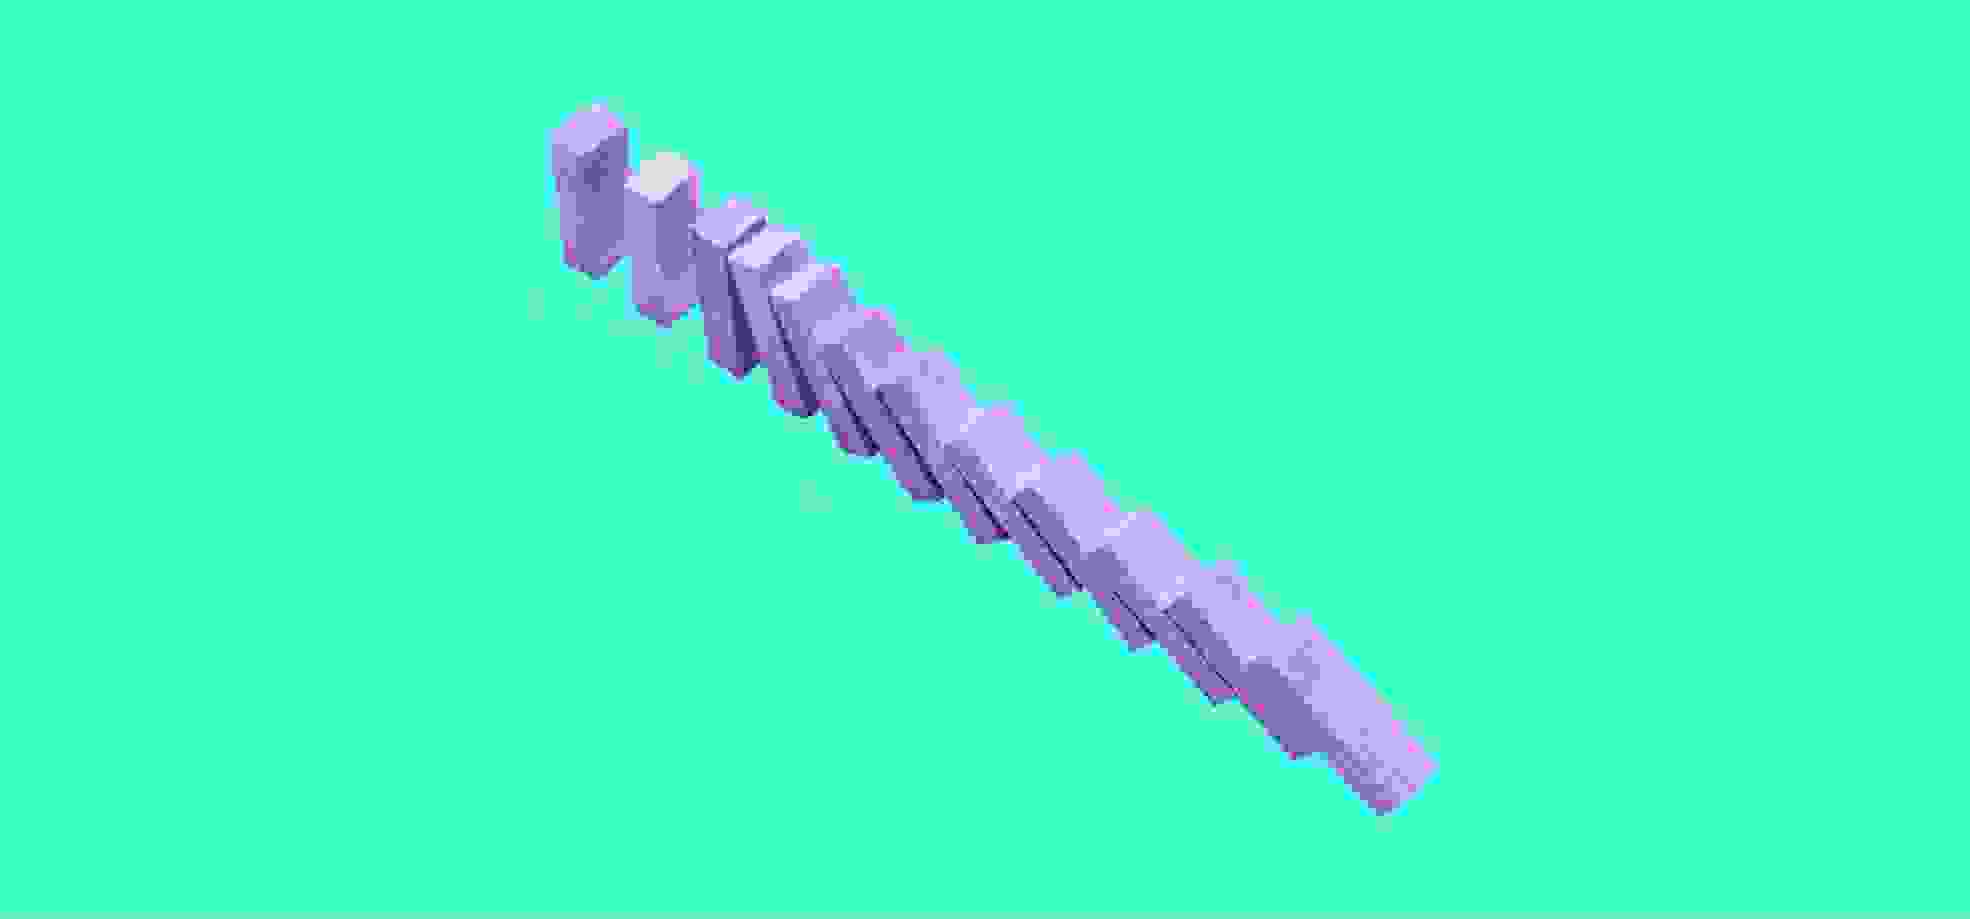 blue domino effect illustration on a purple background